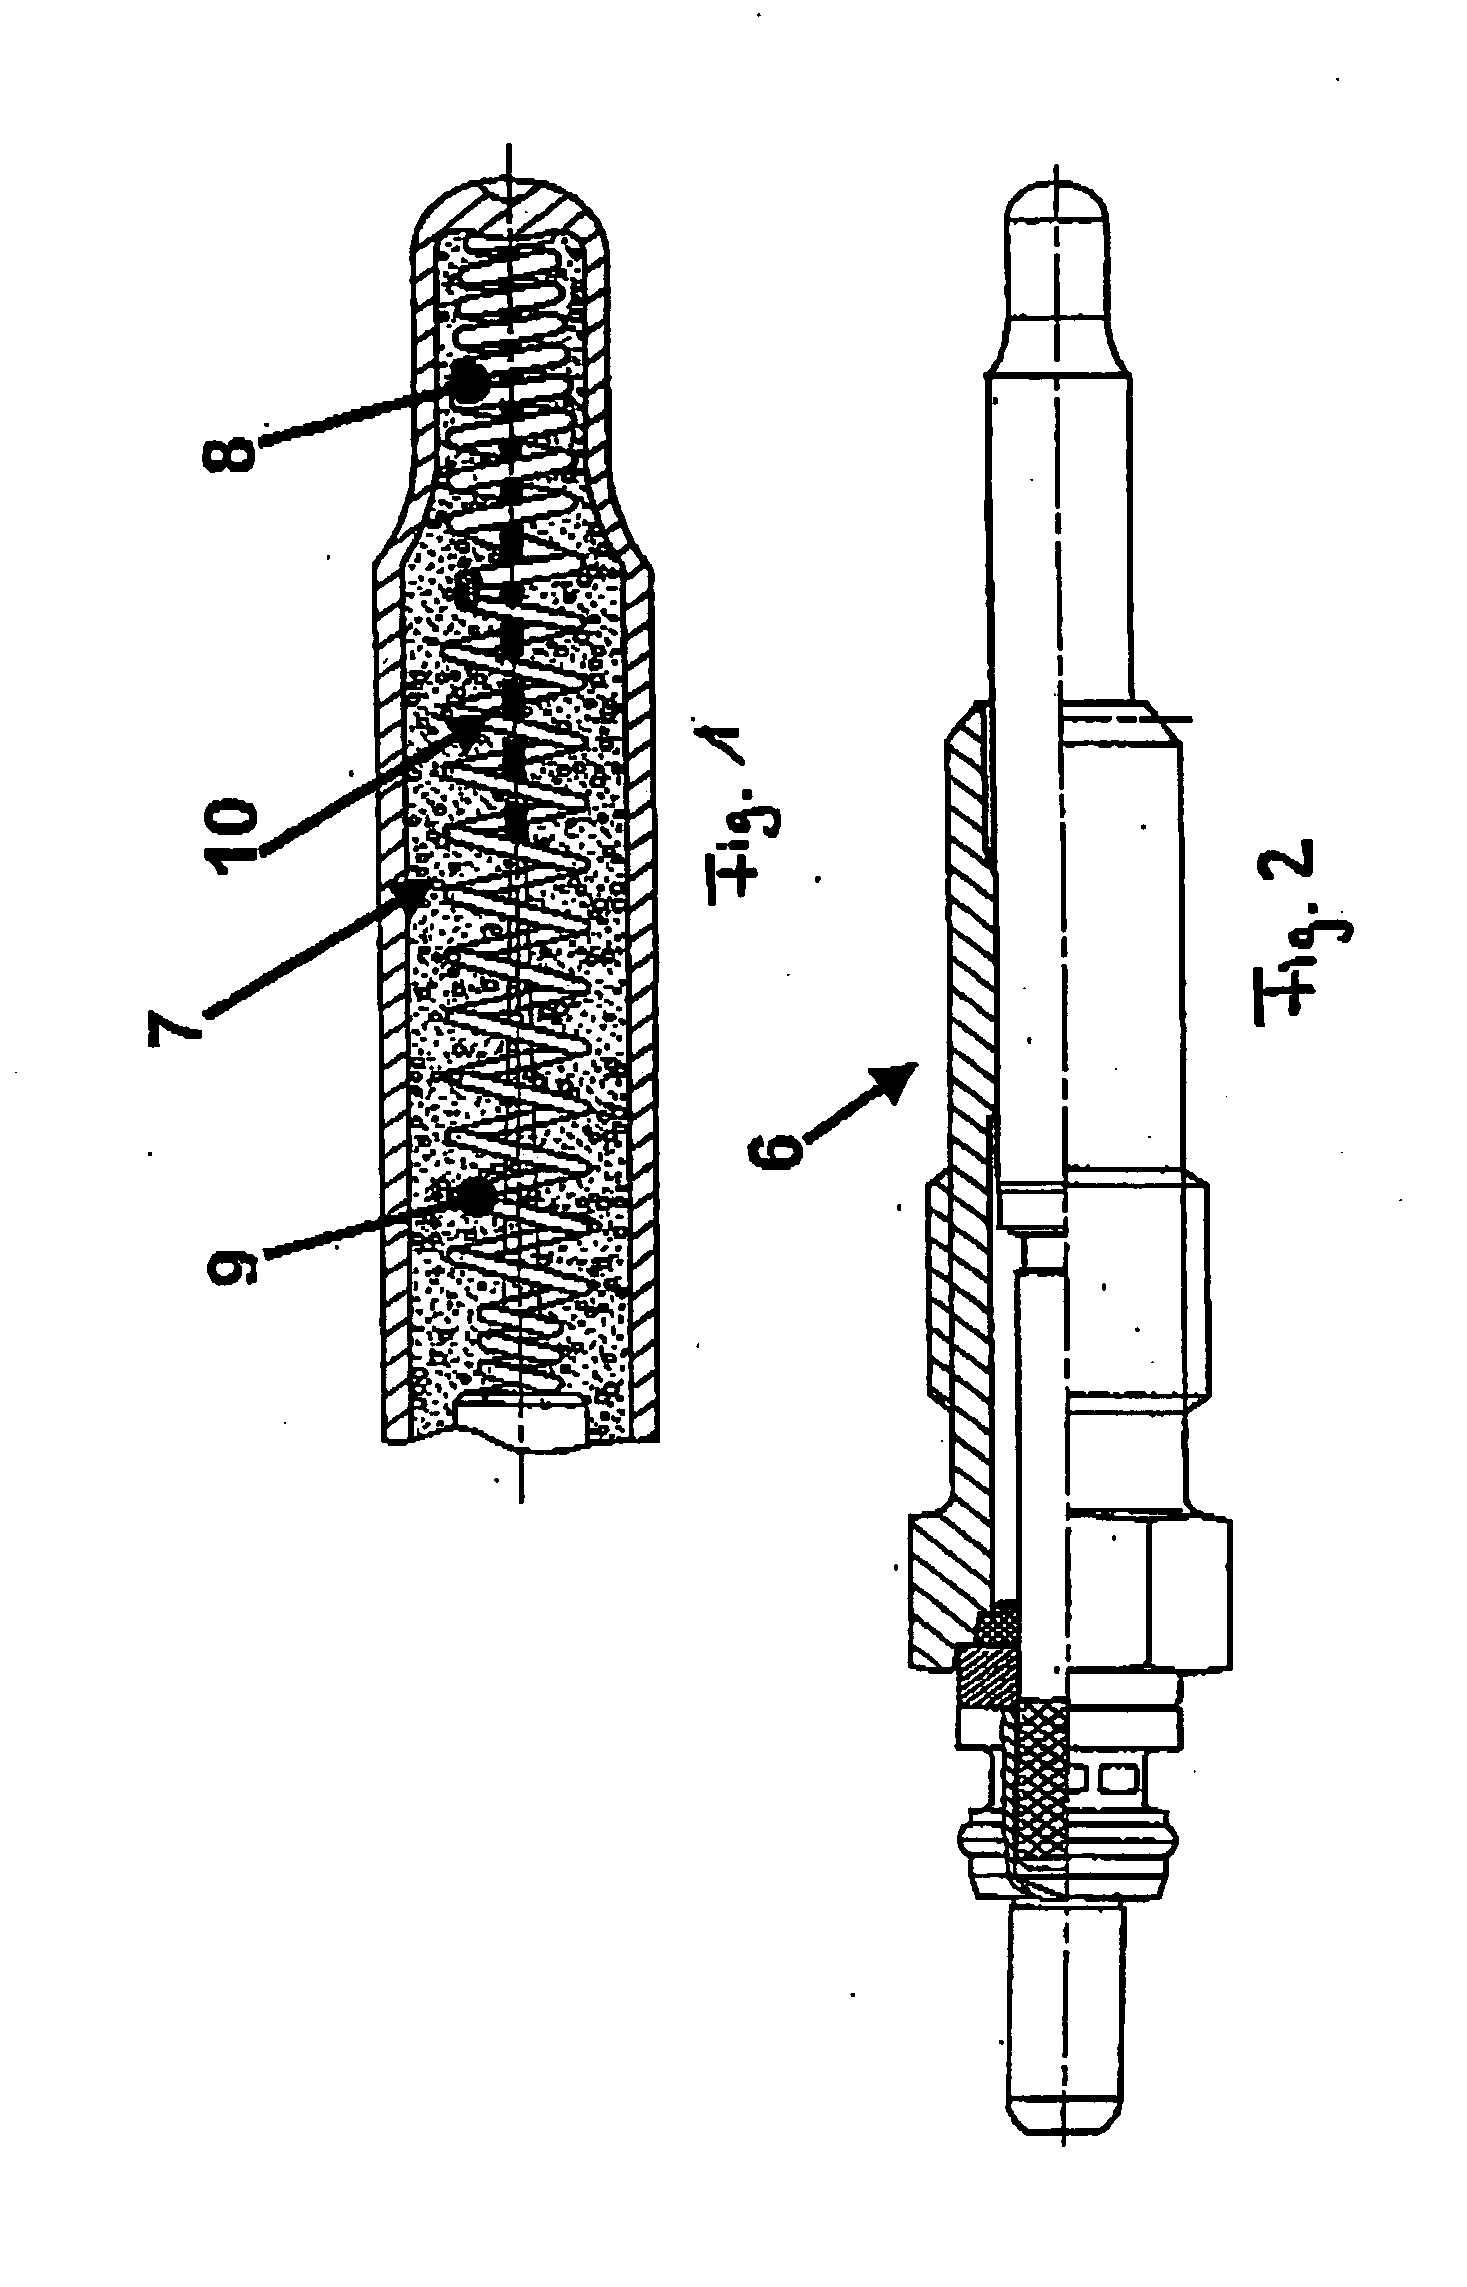 Method and device for controlling the heating of glow plugs in a diesel engine